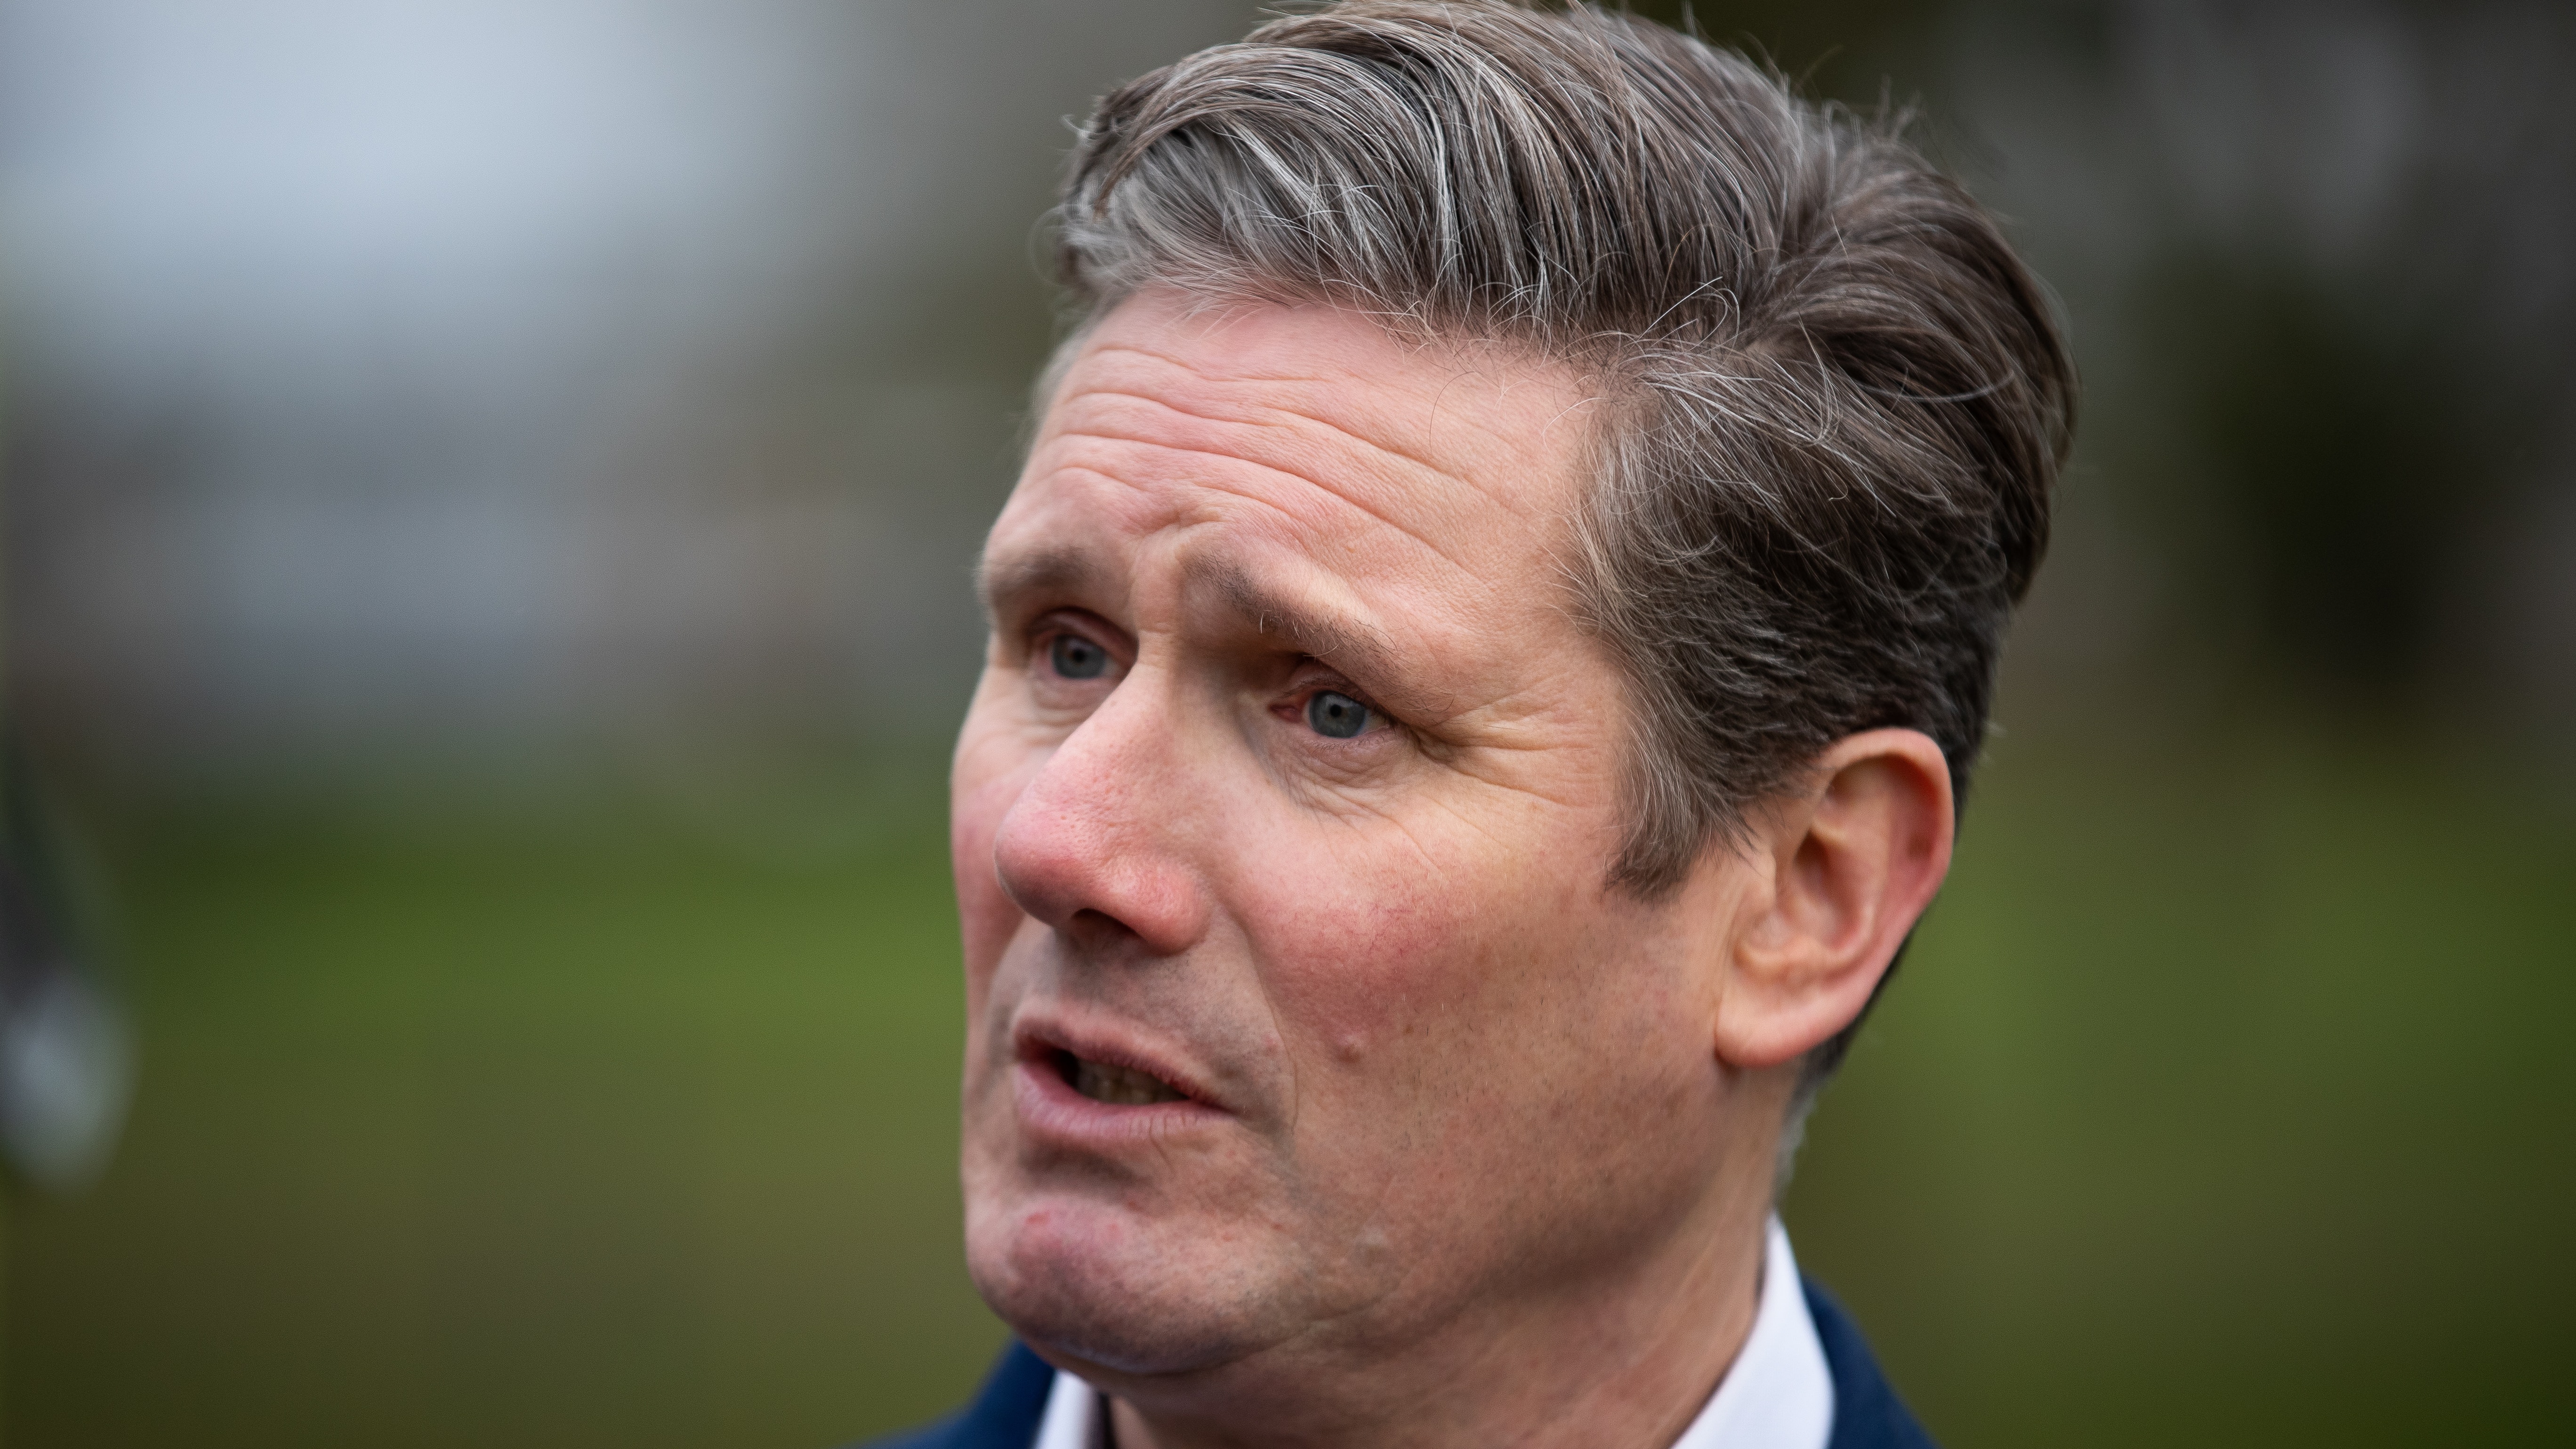 Sir Keir Starmer heads Labour leadership contest with 23 nominations | BT